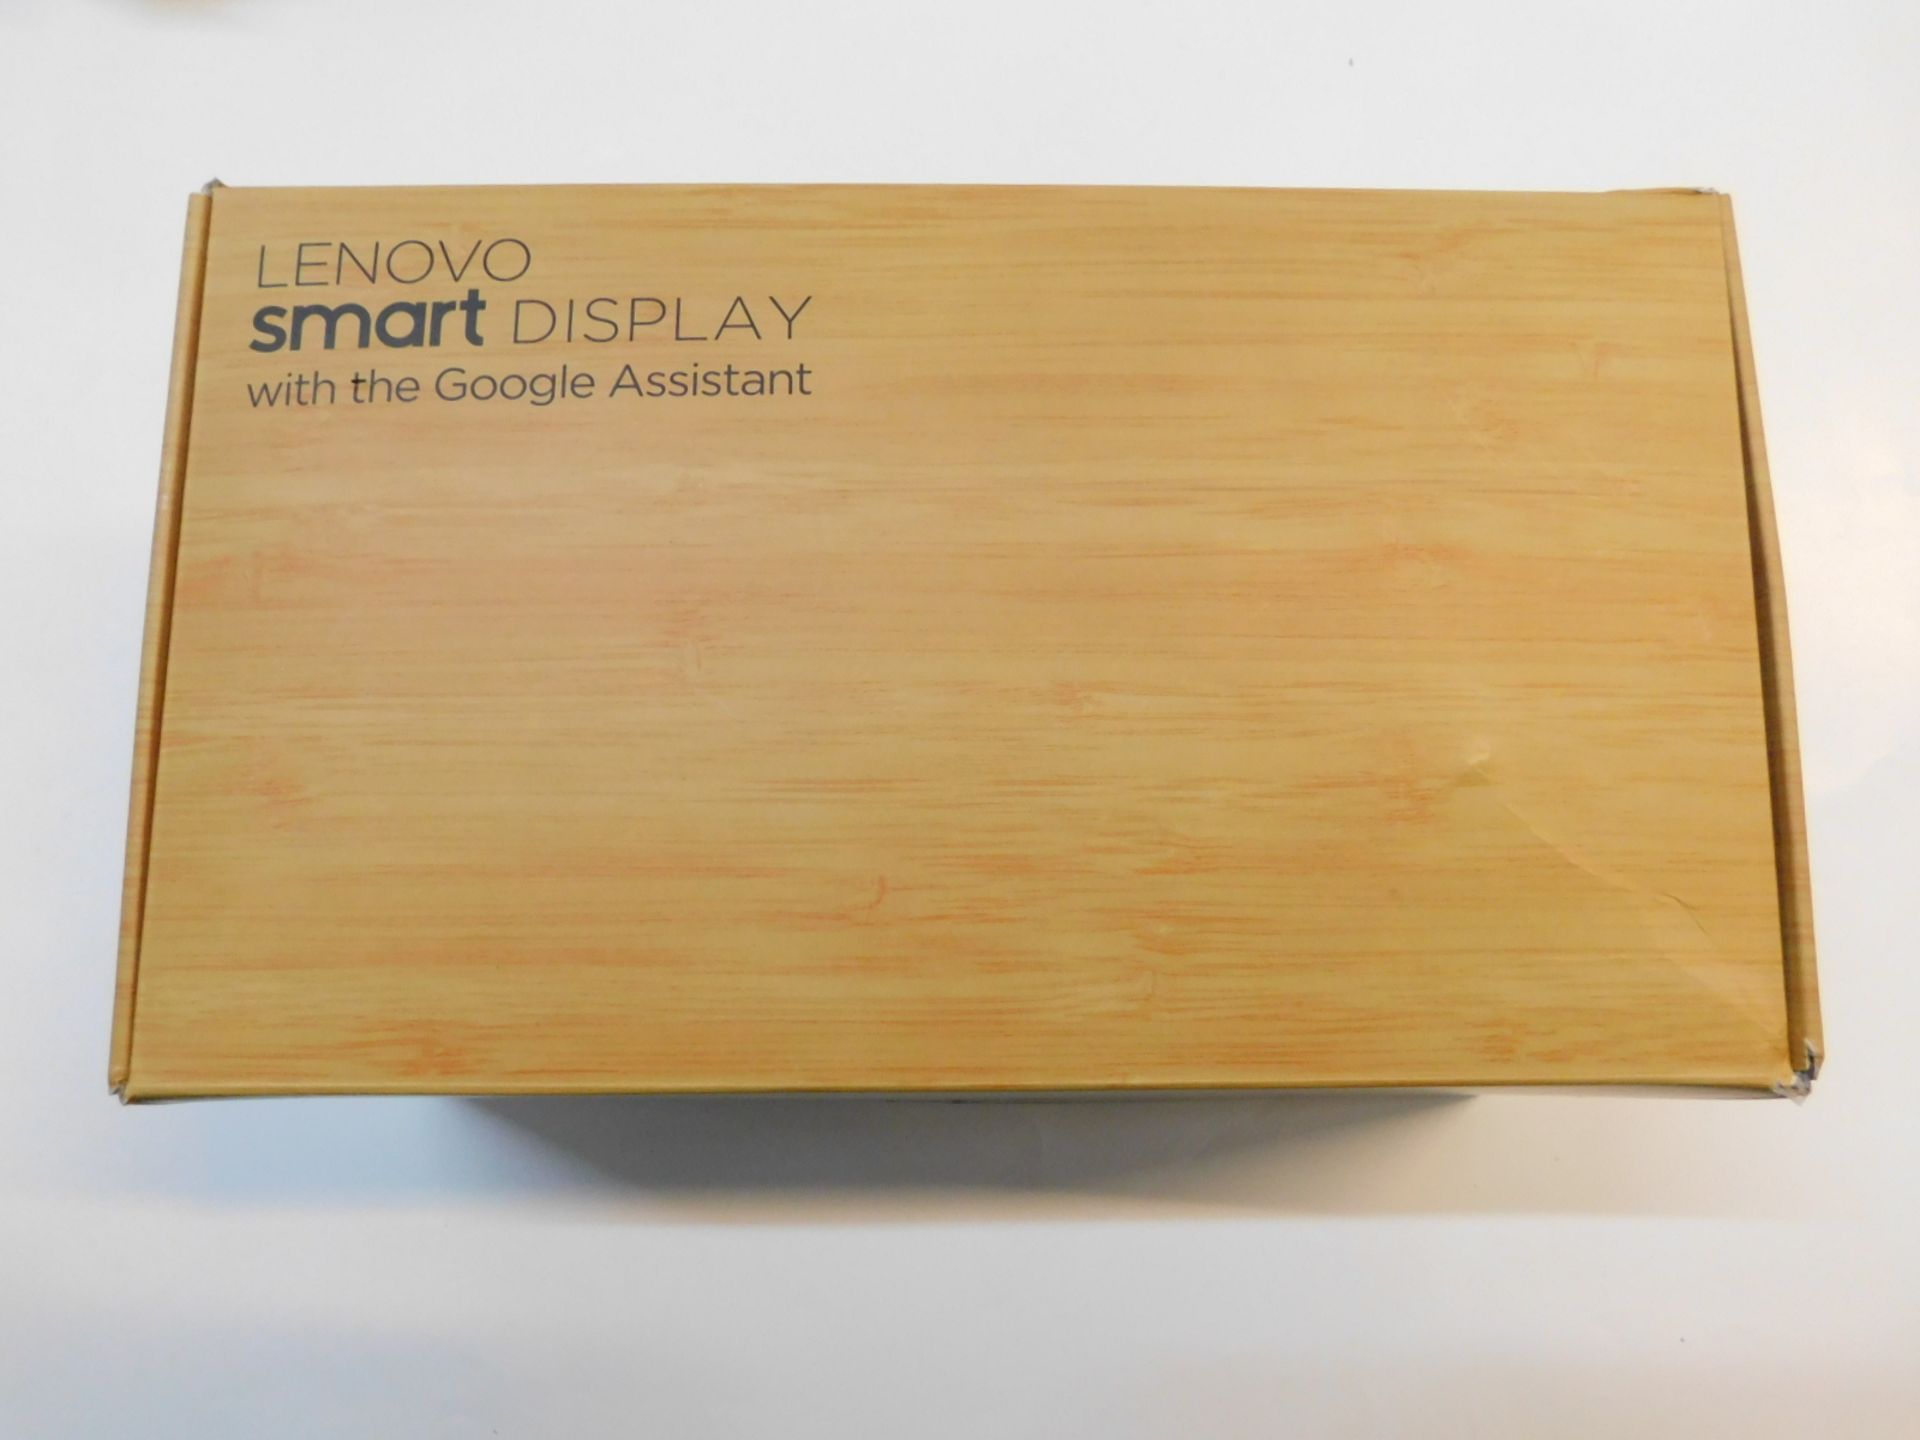 1 BOXED LENOVO SMART DISPLAY WITH GOOGLE ASSISTANT RRP Â£229.99